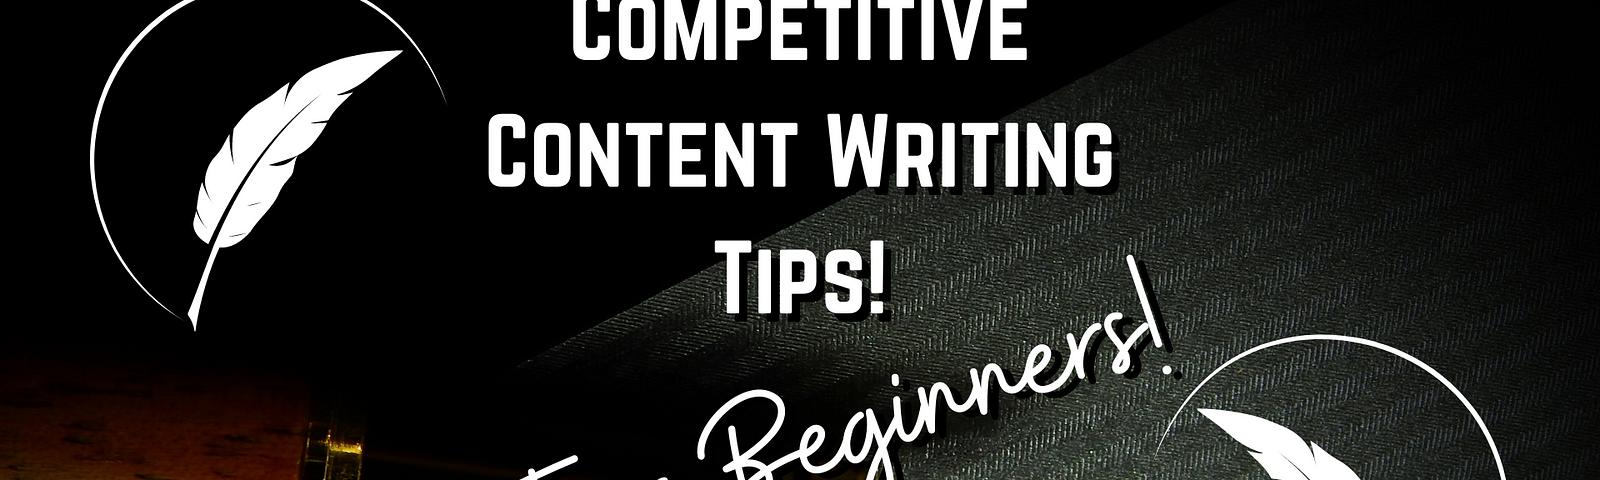 competitive content marketing writing tips for beginners